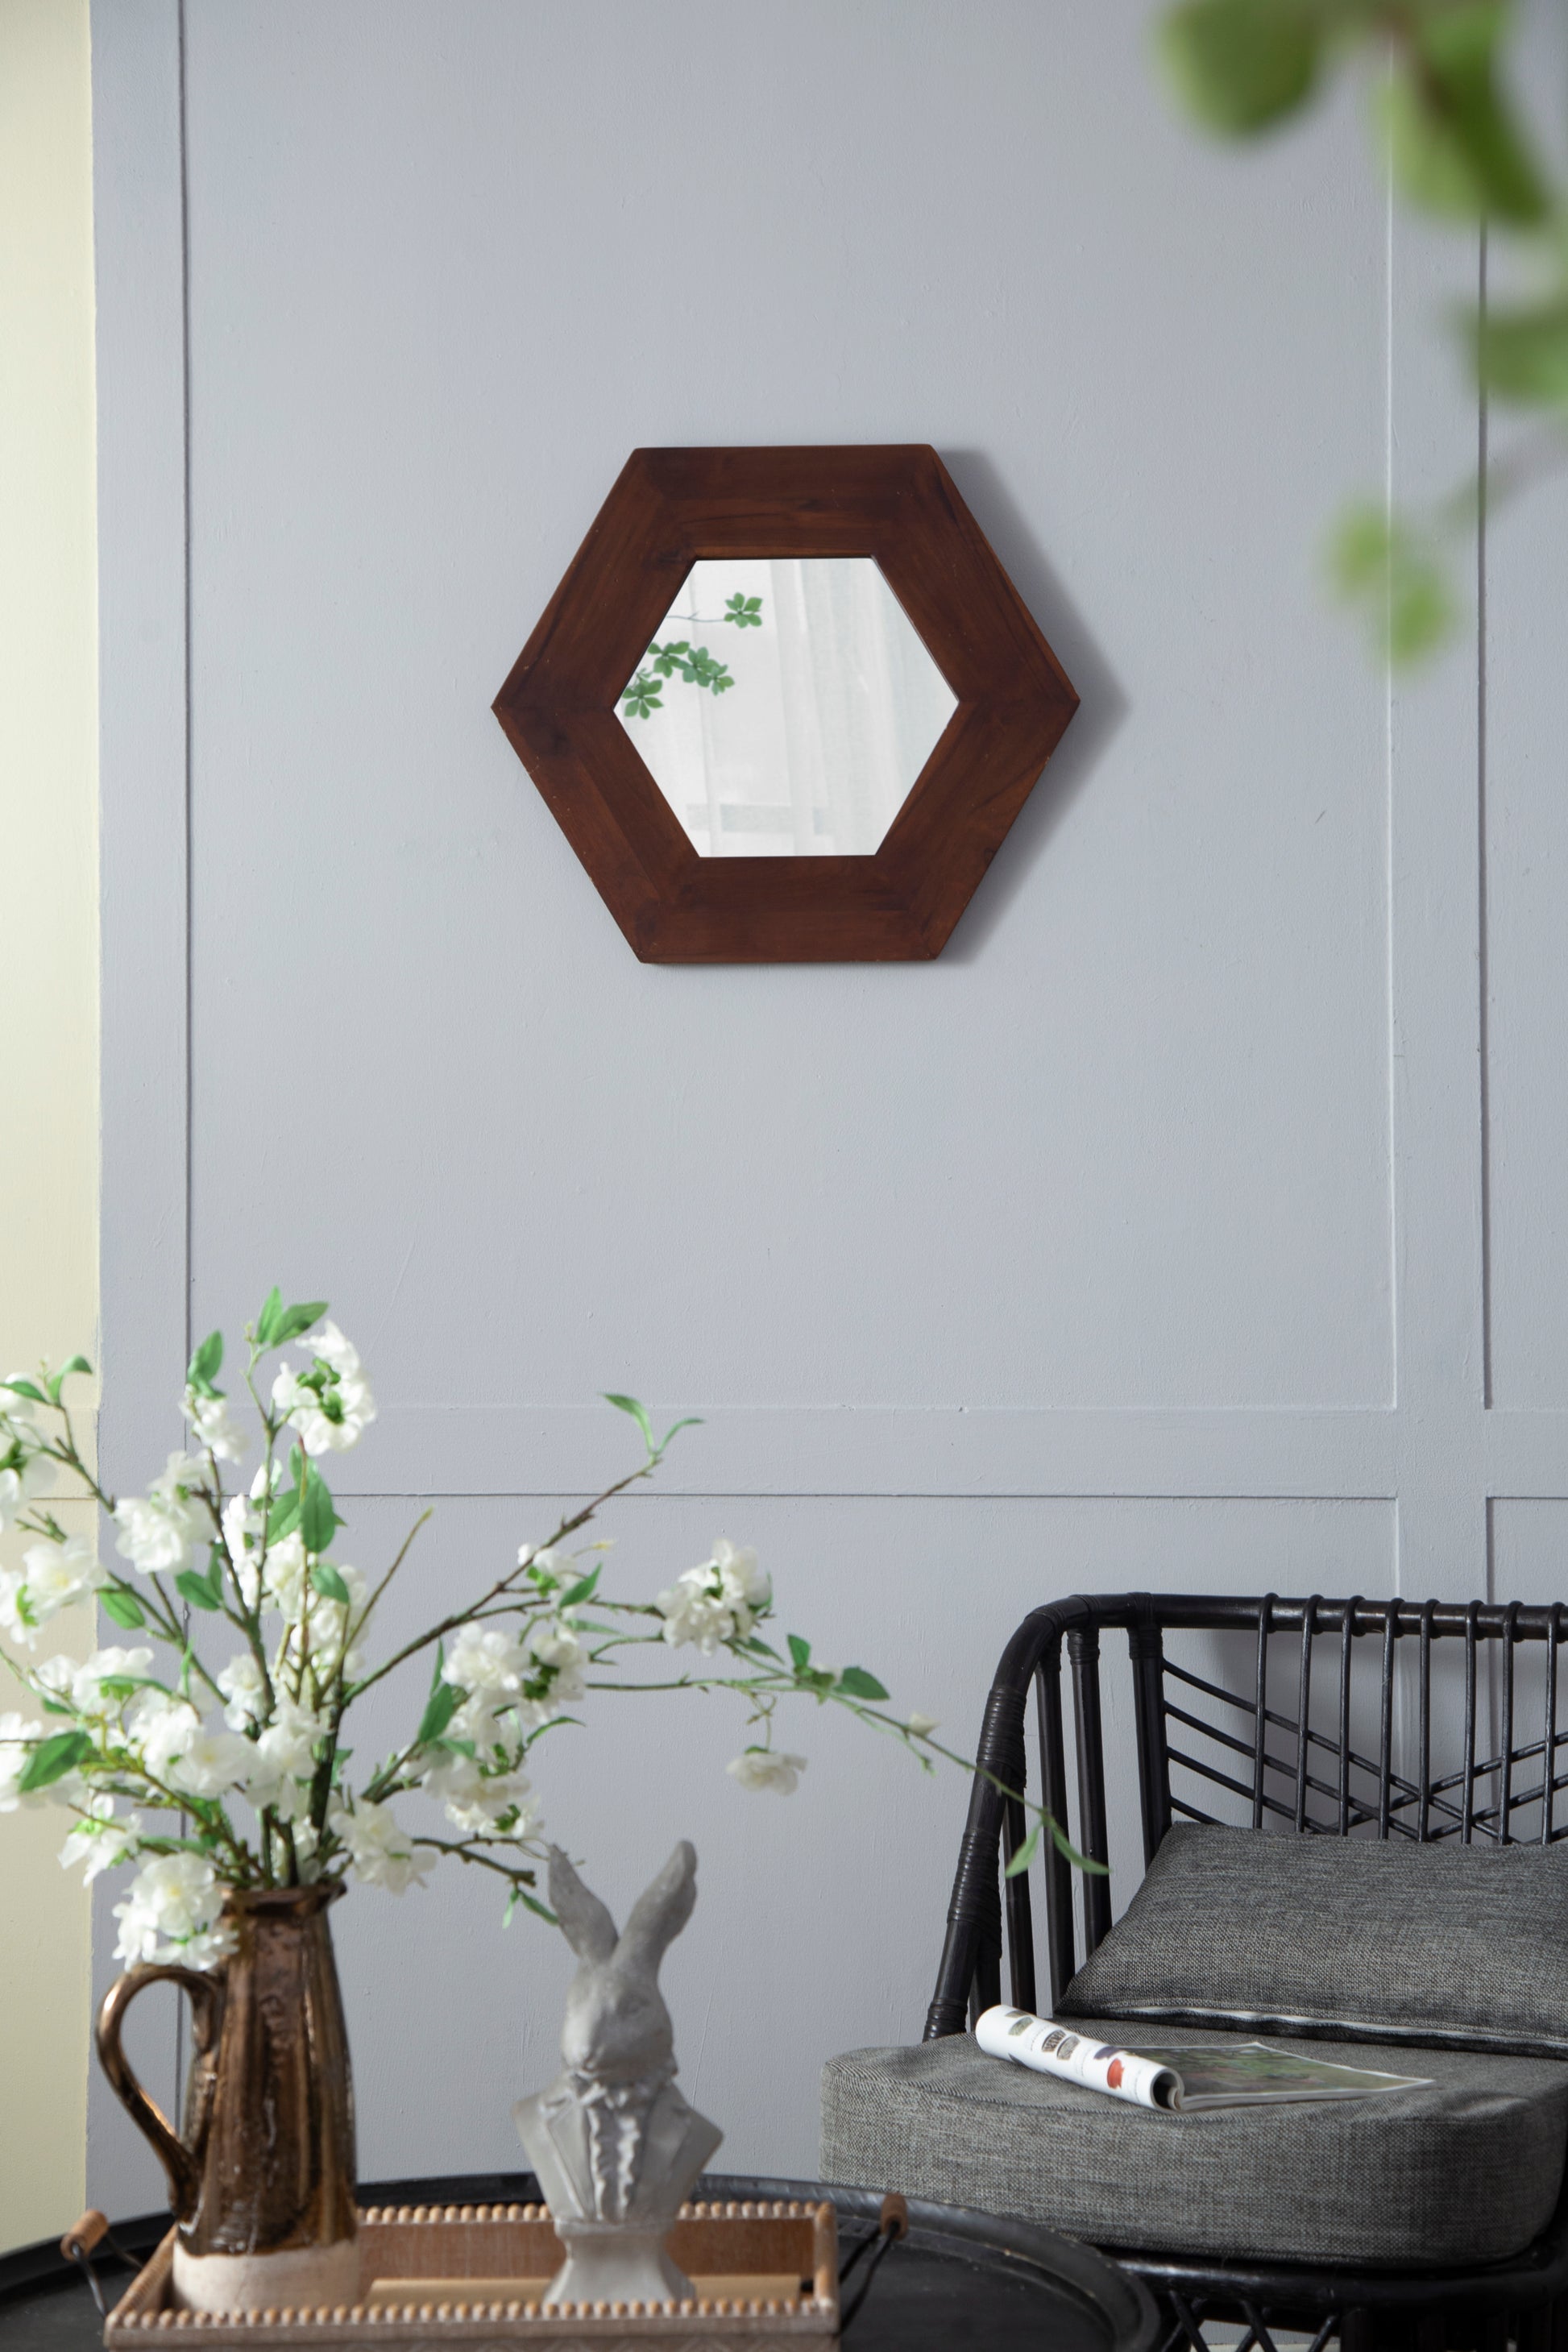 18.5" x 18.5" Hexagon Mirror with Solid Wood Frame brown-wood+glass